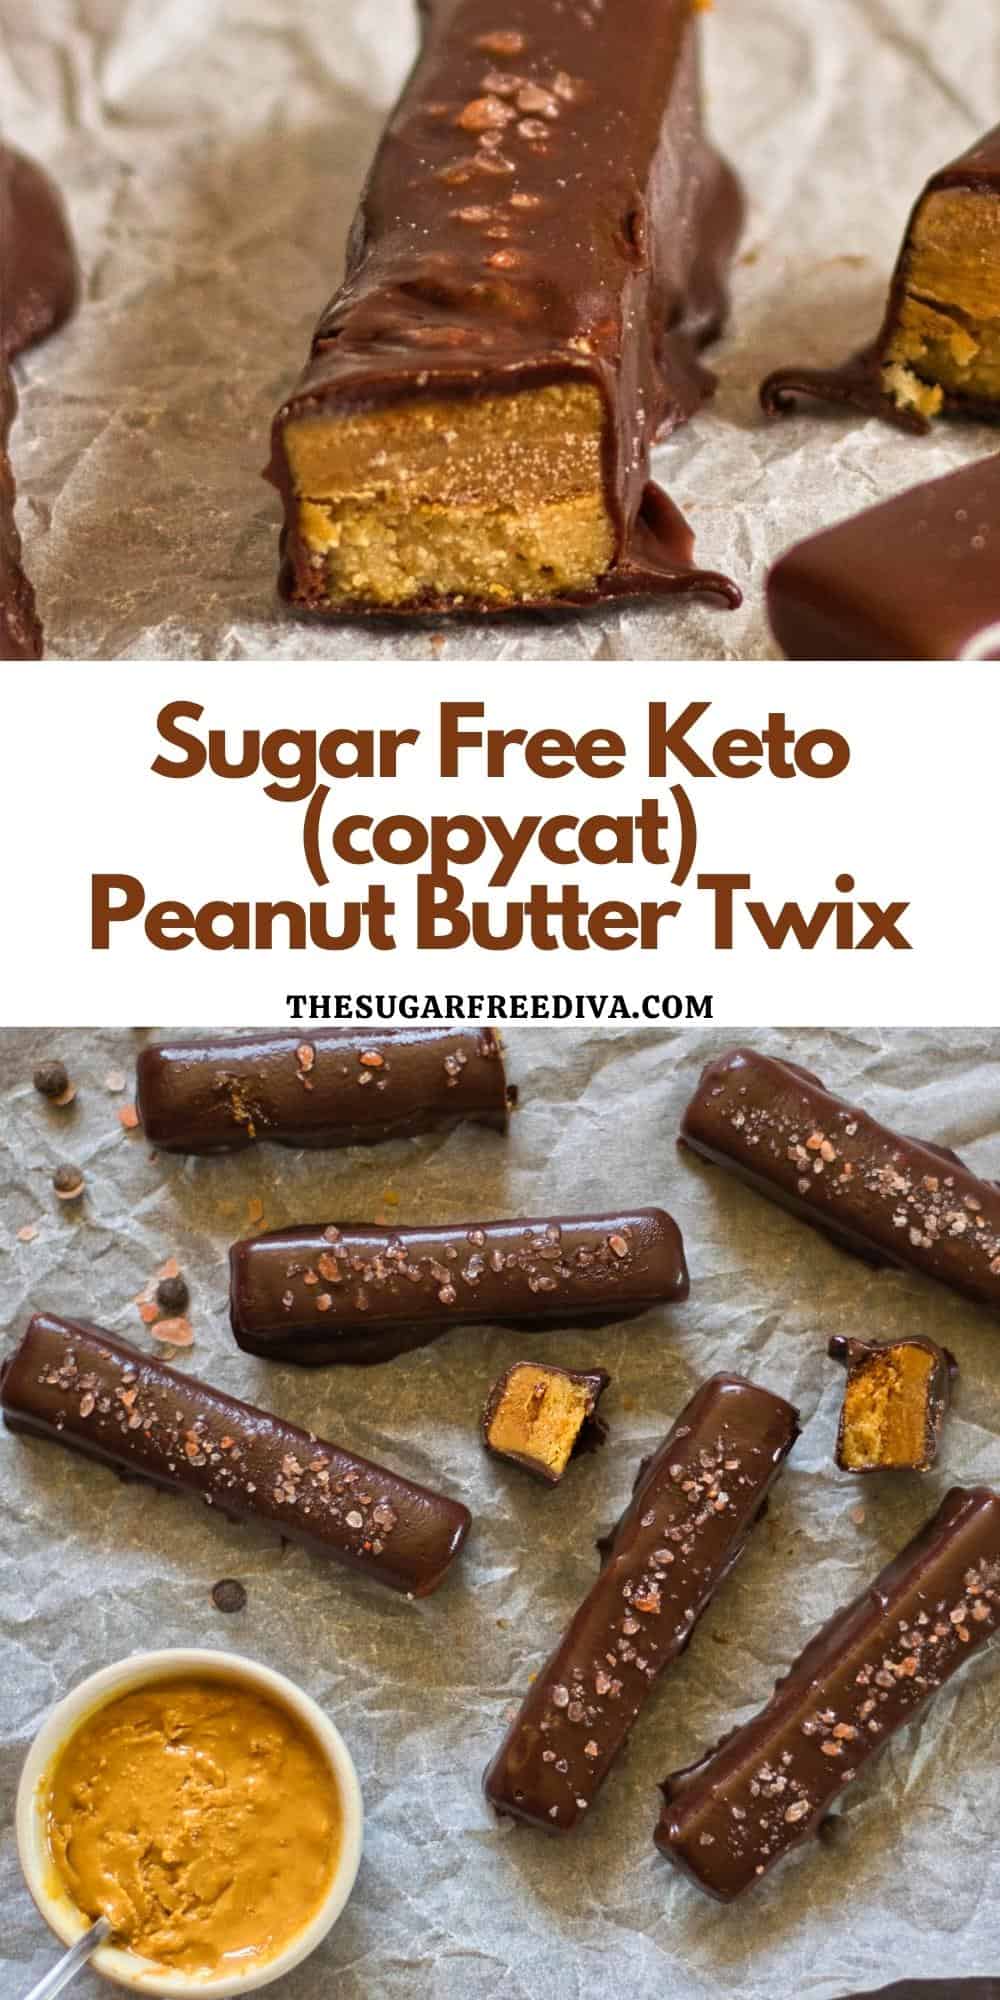 Sugar Free Peanut Butter Twix, a delicious copycat version of a peanut butter flavored  candy bar. No added sugar, keto.